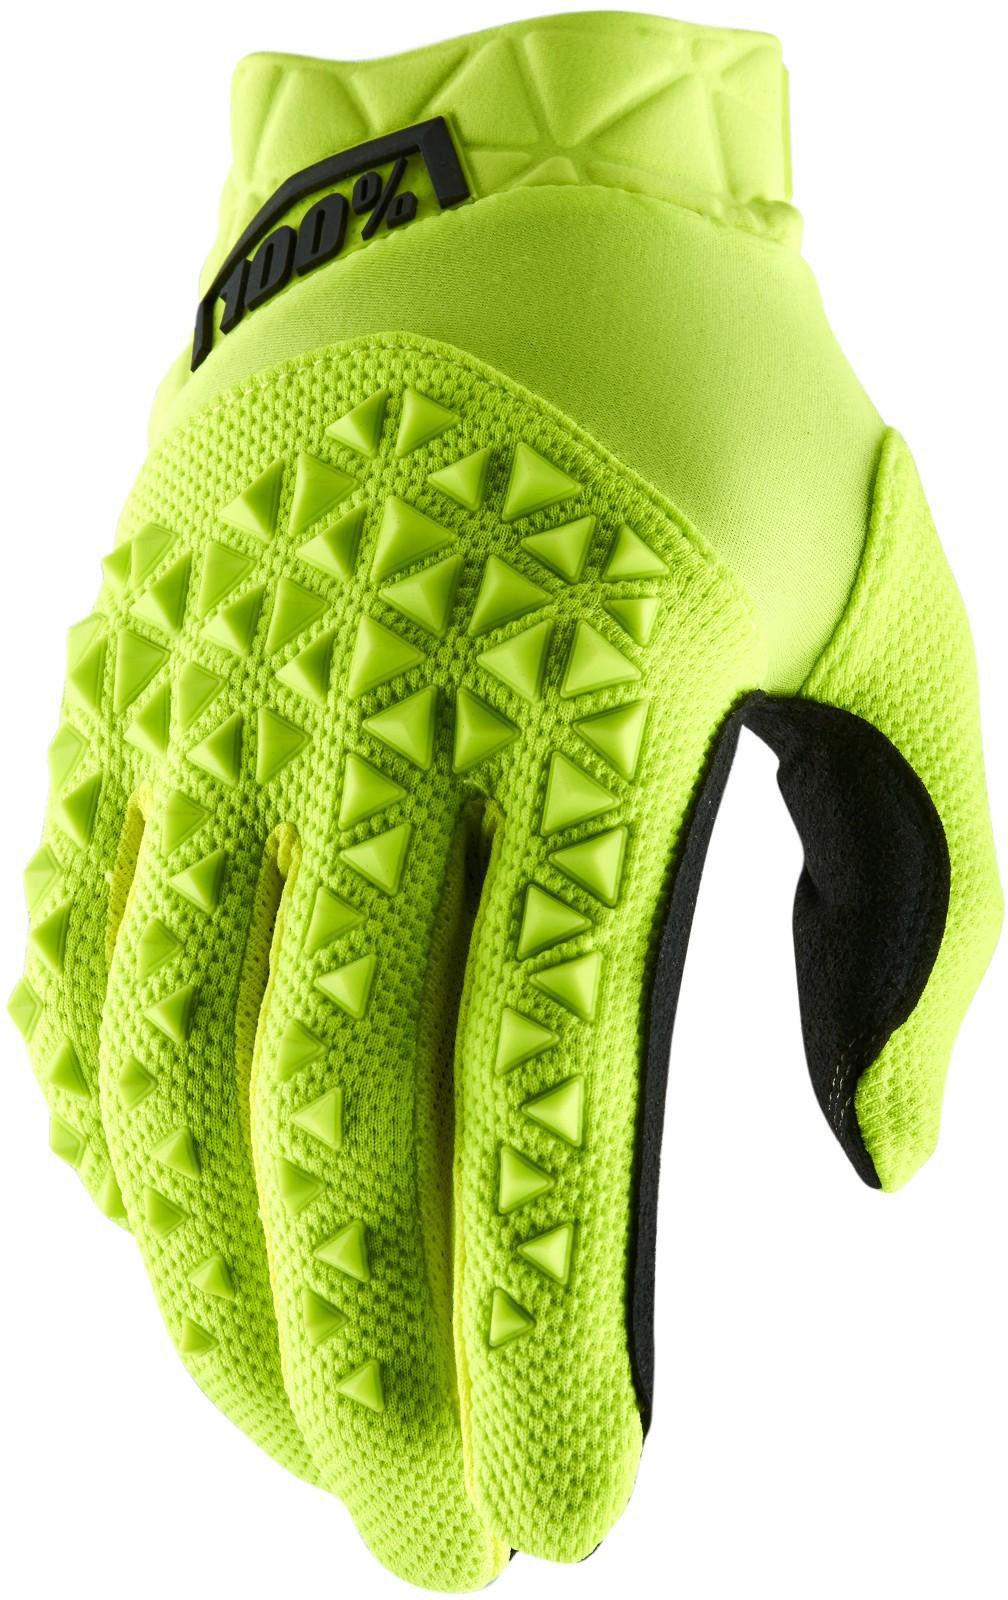 100% Geomatic Gloves - Fluorescent Yellow